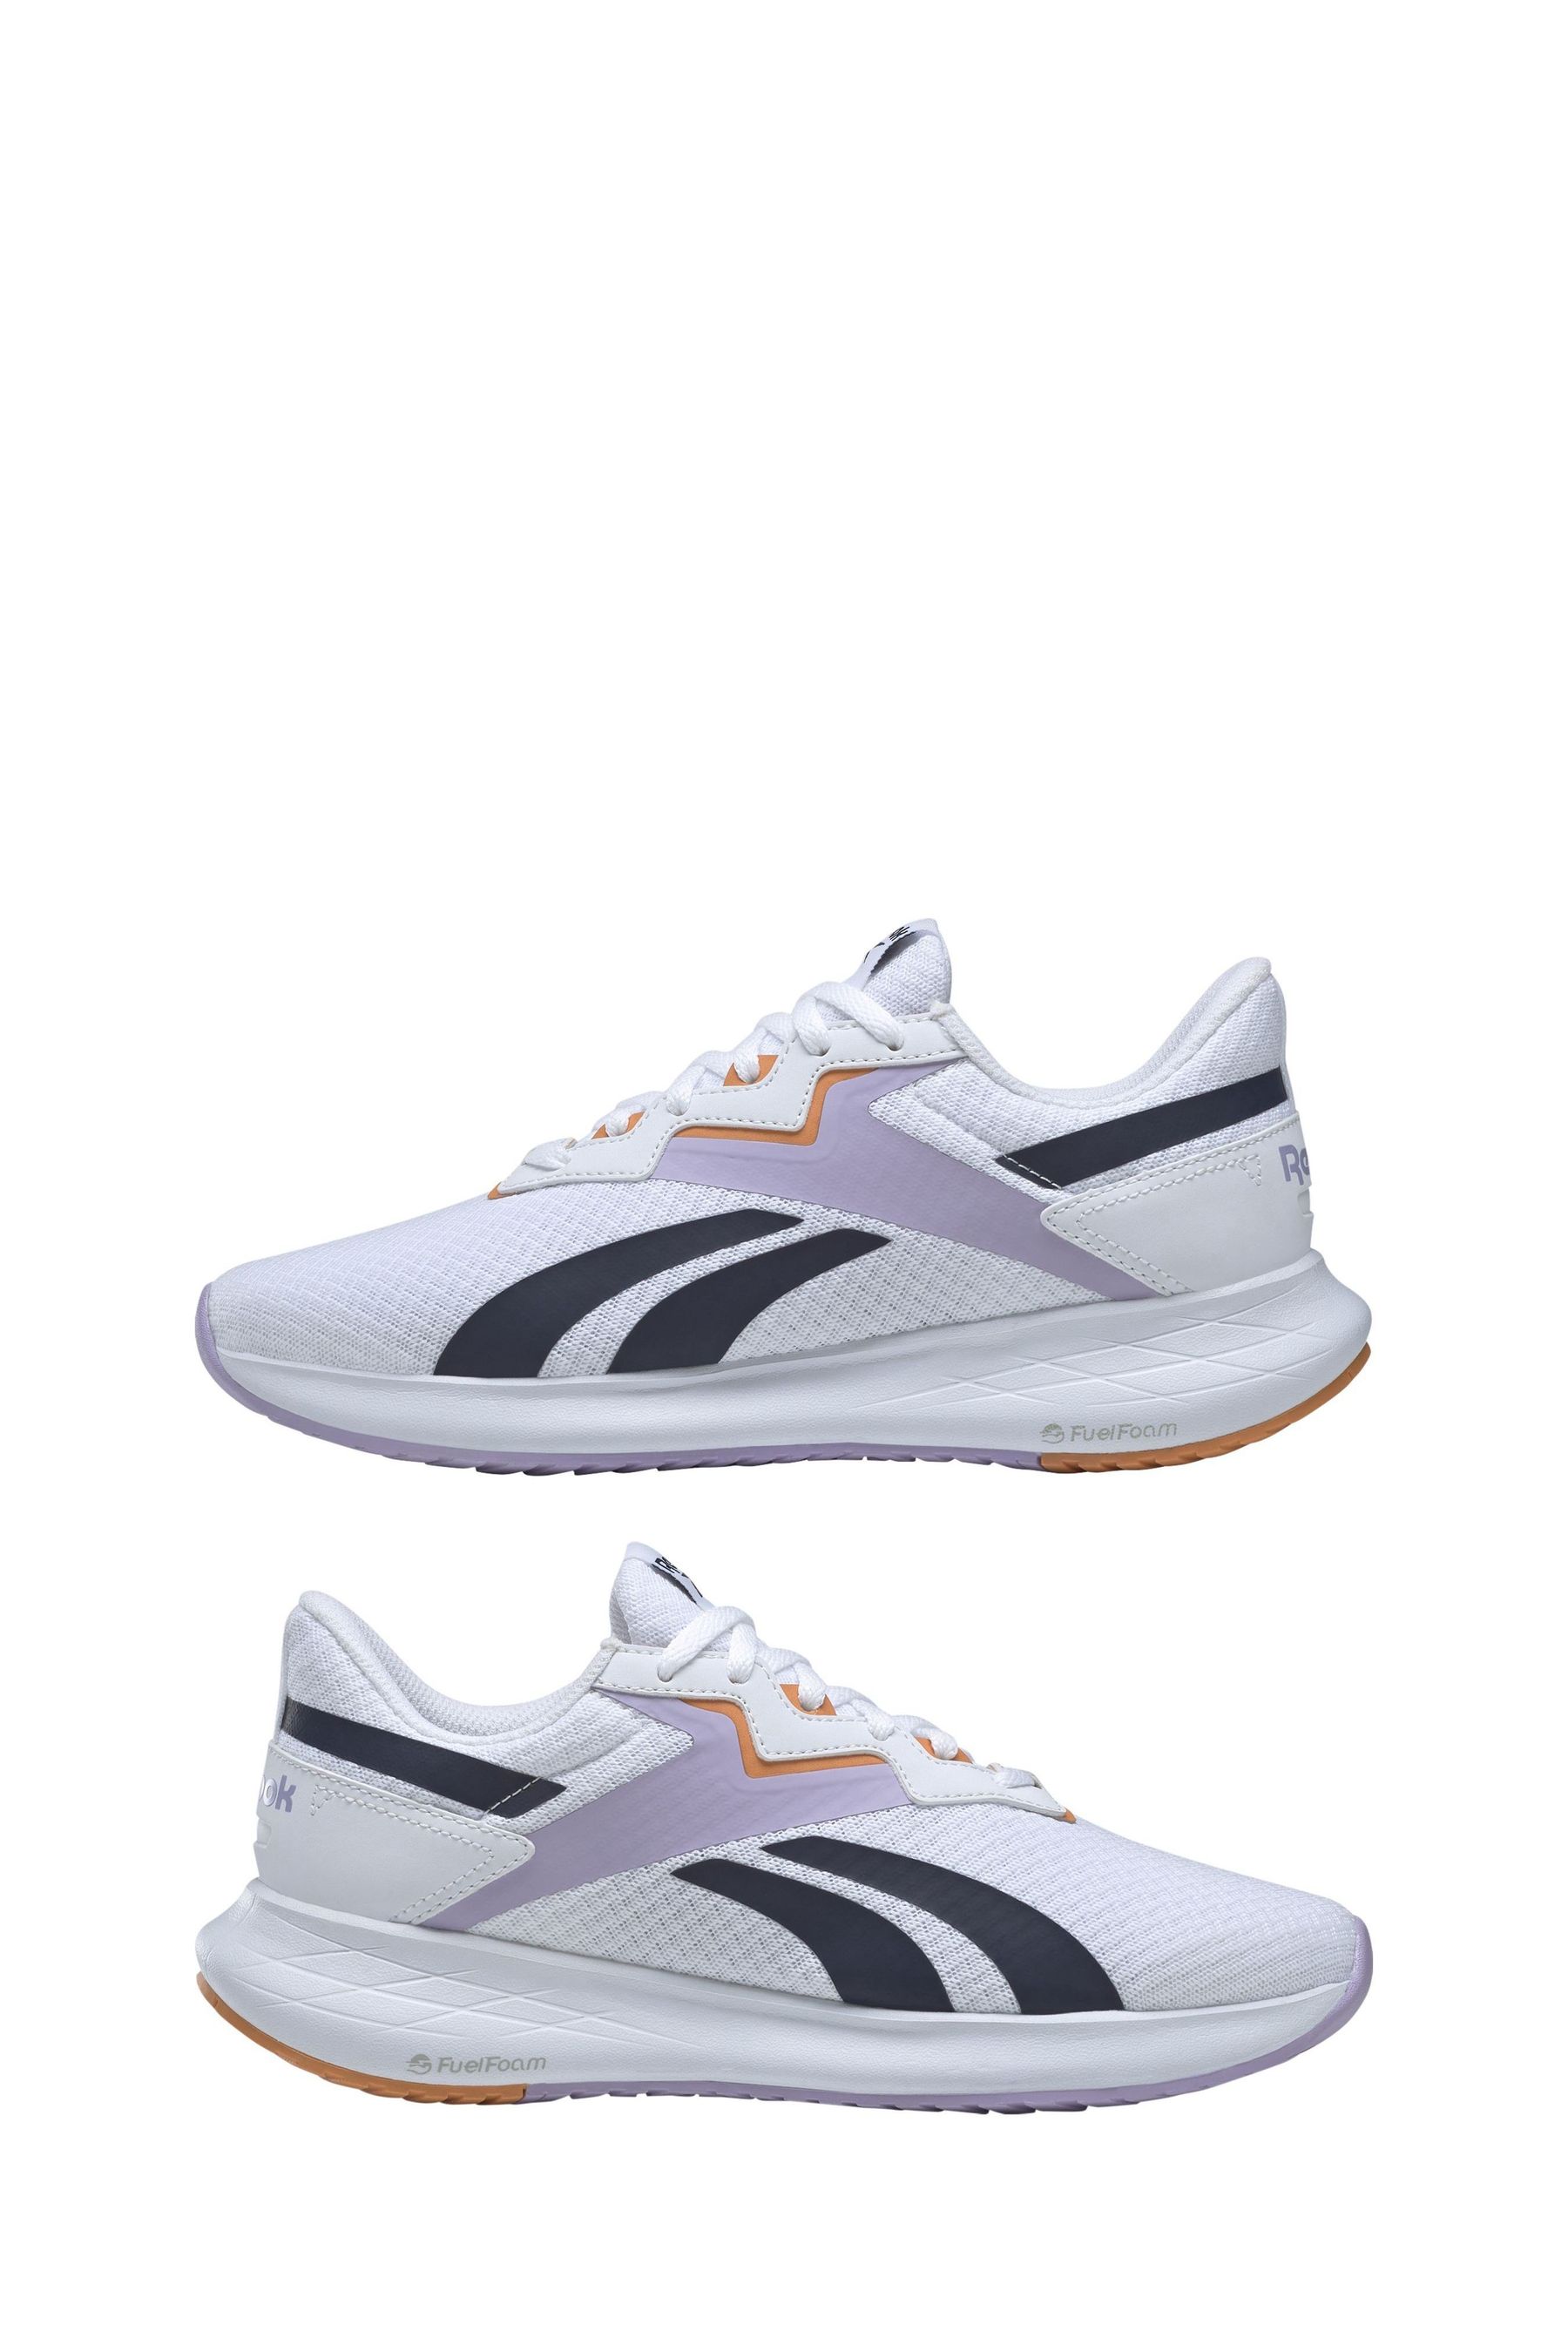 Buy Reebok Energen Plus 2 White Trainers from the Next UK online shop